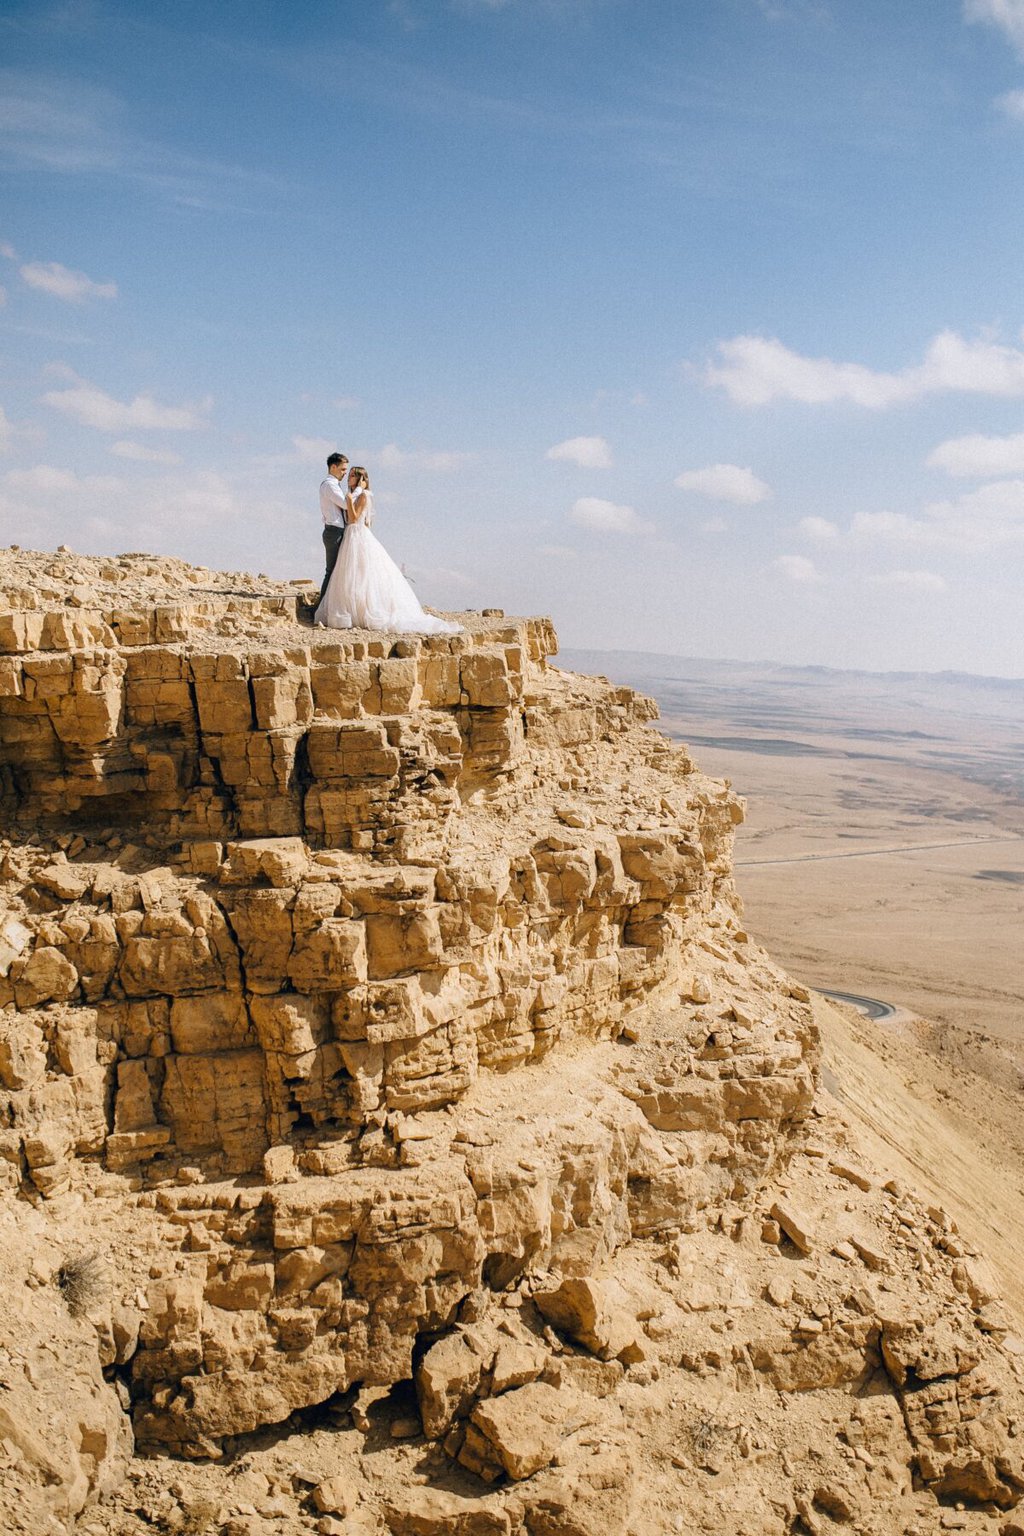 Eloping In The Desert: Why It Is Cooler Than You Think